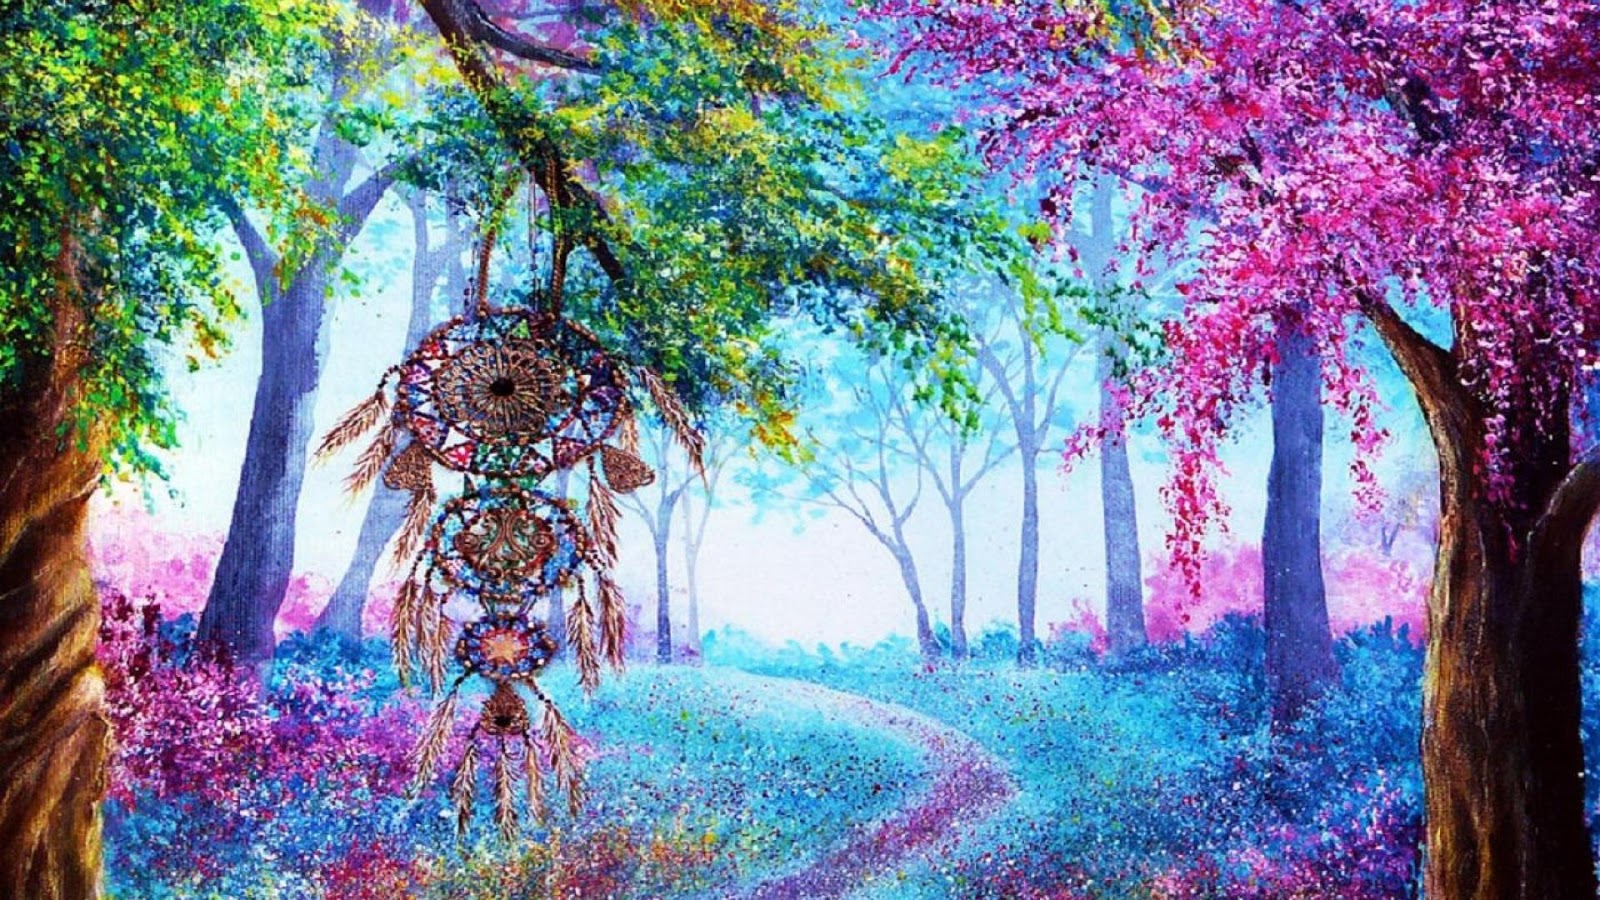 dreamcatcher, artistic, colorful, forest, path High Definition image